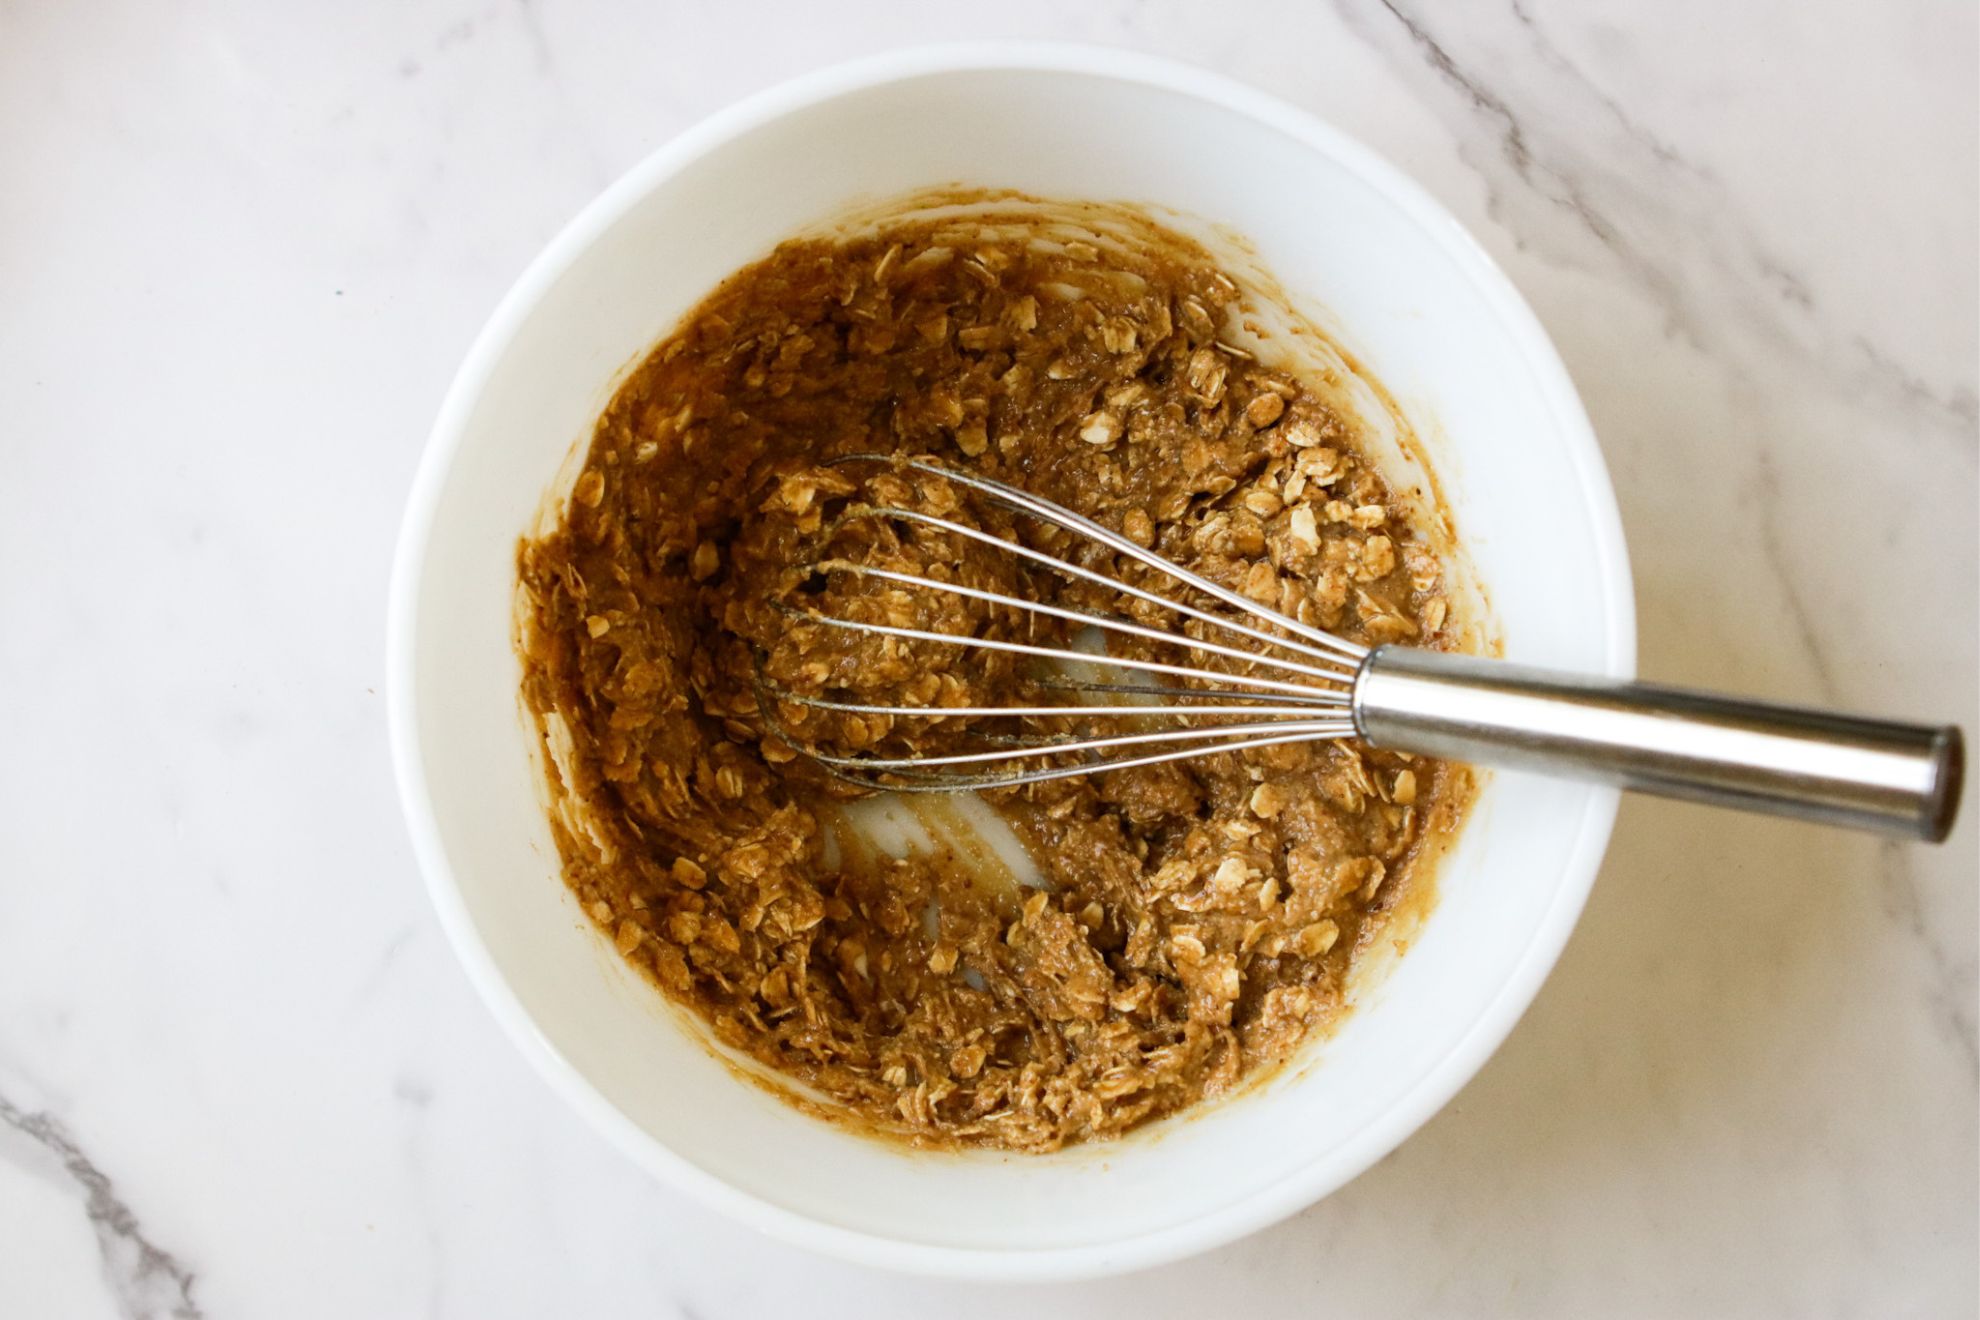 This is an overhead horizontal image of a white bowl on a white marble surface. In the bowl is an oatmeal cookie dough mixed together. A whisk is inserting into the ingredients and leaning against the side of the bowl with the whisk pointing to the right side of the image.